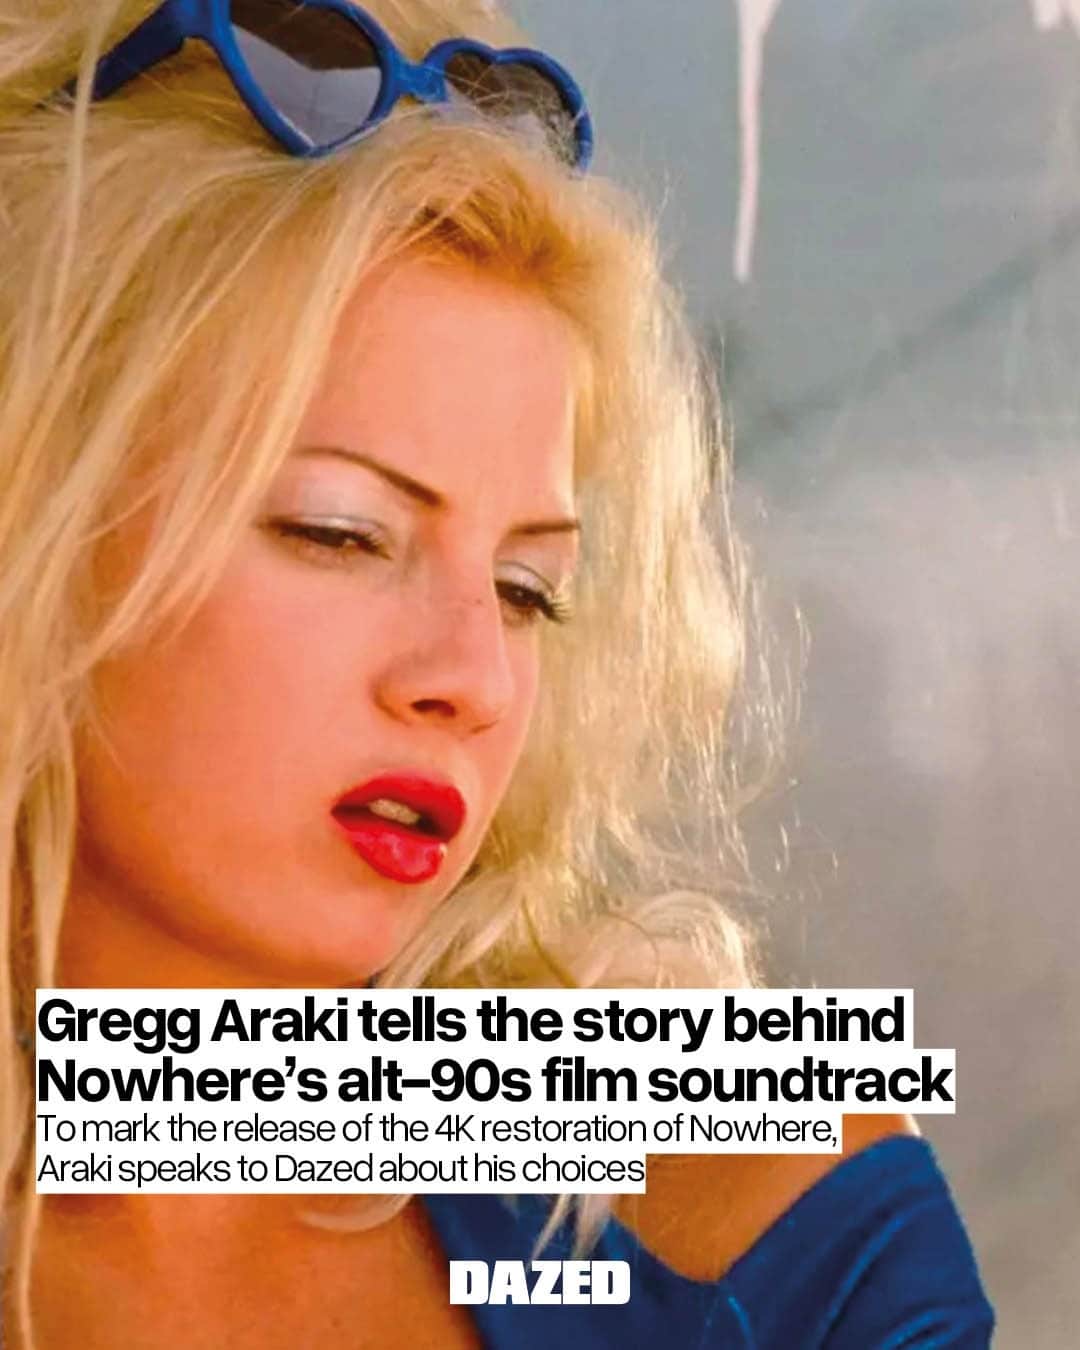 Dazed Magazineのインスタグラム：「Once a music critic for LA Weekly who still listens to music “literally 24 hours a day”, #GreggAraki’s credentials for being able to transform hyper-cool, eye-popping youth dramas indie films into ear-popping alt-rock video-mixtapes were evident long before his mid-90s breakthrough. ⁠ ⁠ Even his own production company, ‘Desperate Pictures’, was named for a song by LA punk band X. ⁠ ⁠ And though dream pop heroes Robin Guthrie (of the #CocteauTwins) and Harold Budd would later provide ethereal scores for Mysterious Skin and White Bird in a Blizzard, Araki’s indelible mark on indie cinema had by then already been firmly established – with films like The Doom Generation and Nowhere pairing euphoric indie, shoegaze and dance music with kaleidoscopic colours and devastating one-liners to incendiary effect.⁠ ⁠ In 2023, the two latter films are receiving the ultimate makeover after decades of obscurity, with the director remixing audio and restoring video in “mindblowing” new presentations. In the case of Nowhere – the story of a gaggle of hip kids with names like Elvis, Lucifer, and Godzilla, who pop pills and have kinky sex while confronting giant lizardmen, gun-toting cults and televangelists – the movie is now closer to the director’s original vision of a “psychedelic, super-colourful and crazy Alice in Wonderland trip” than it’s ever been. ⁠ ⁠ With its “incredible soundtrack” key to that creative explosiveness, Dazed decided to catch up with Araki as he tours the States promoting the new cut – playing spin the bottle with some of the best needle drops from the LA party cult classic. ⁠ ⁠ Crank it up through the link in our bio 🔗⁠ ⁠ 📷 Nowhere, 1997 + The Doom Generation, 1995⁠ ✍️ @jamesbalmont」